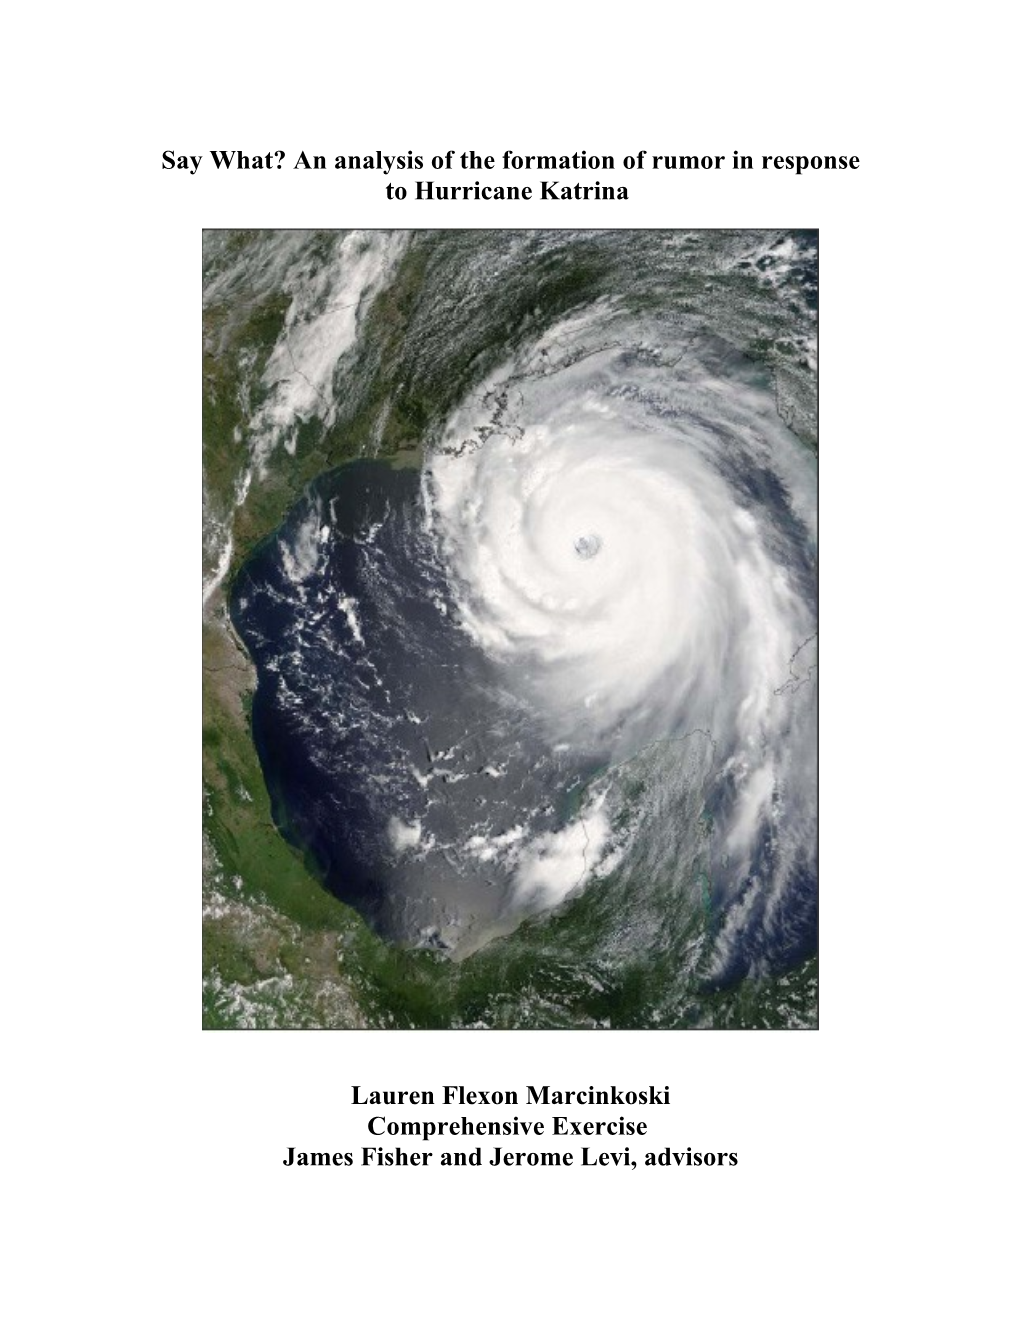 Say What? an Analysis of the Formation of Rumor in Response to Hurricane Katrina